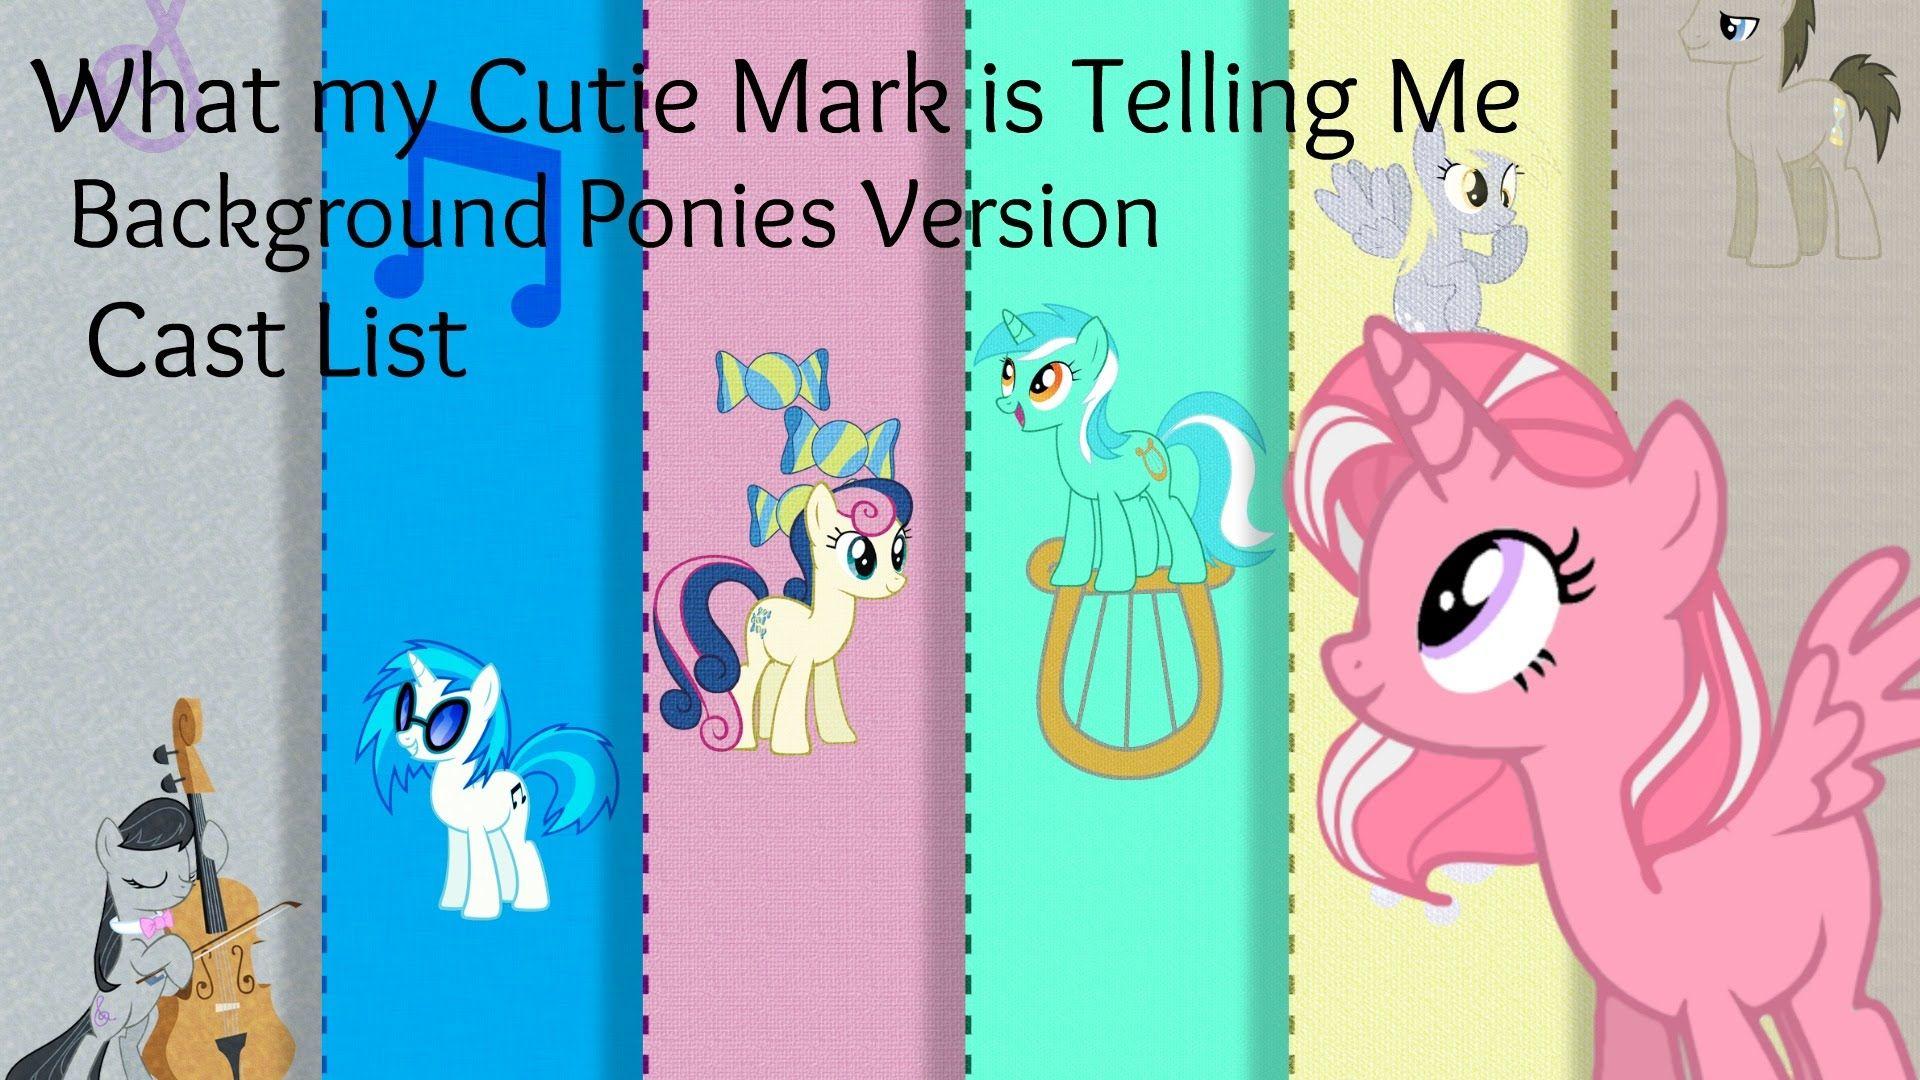 What My Cutie Mark is Telling Me Backgrounds Ponies Cast List! 